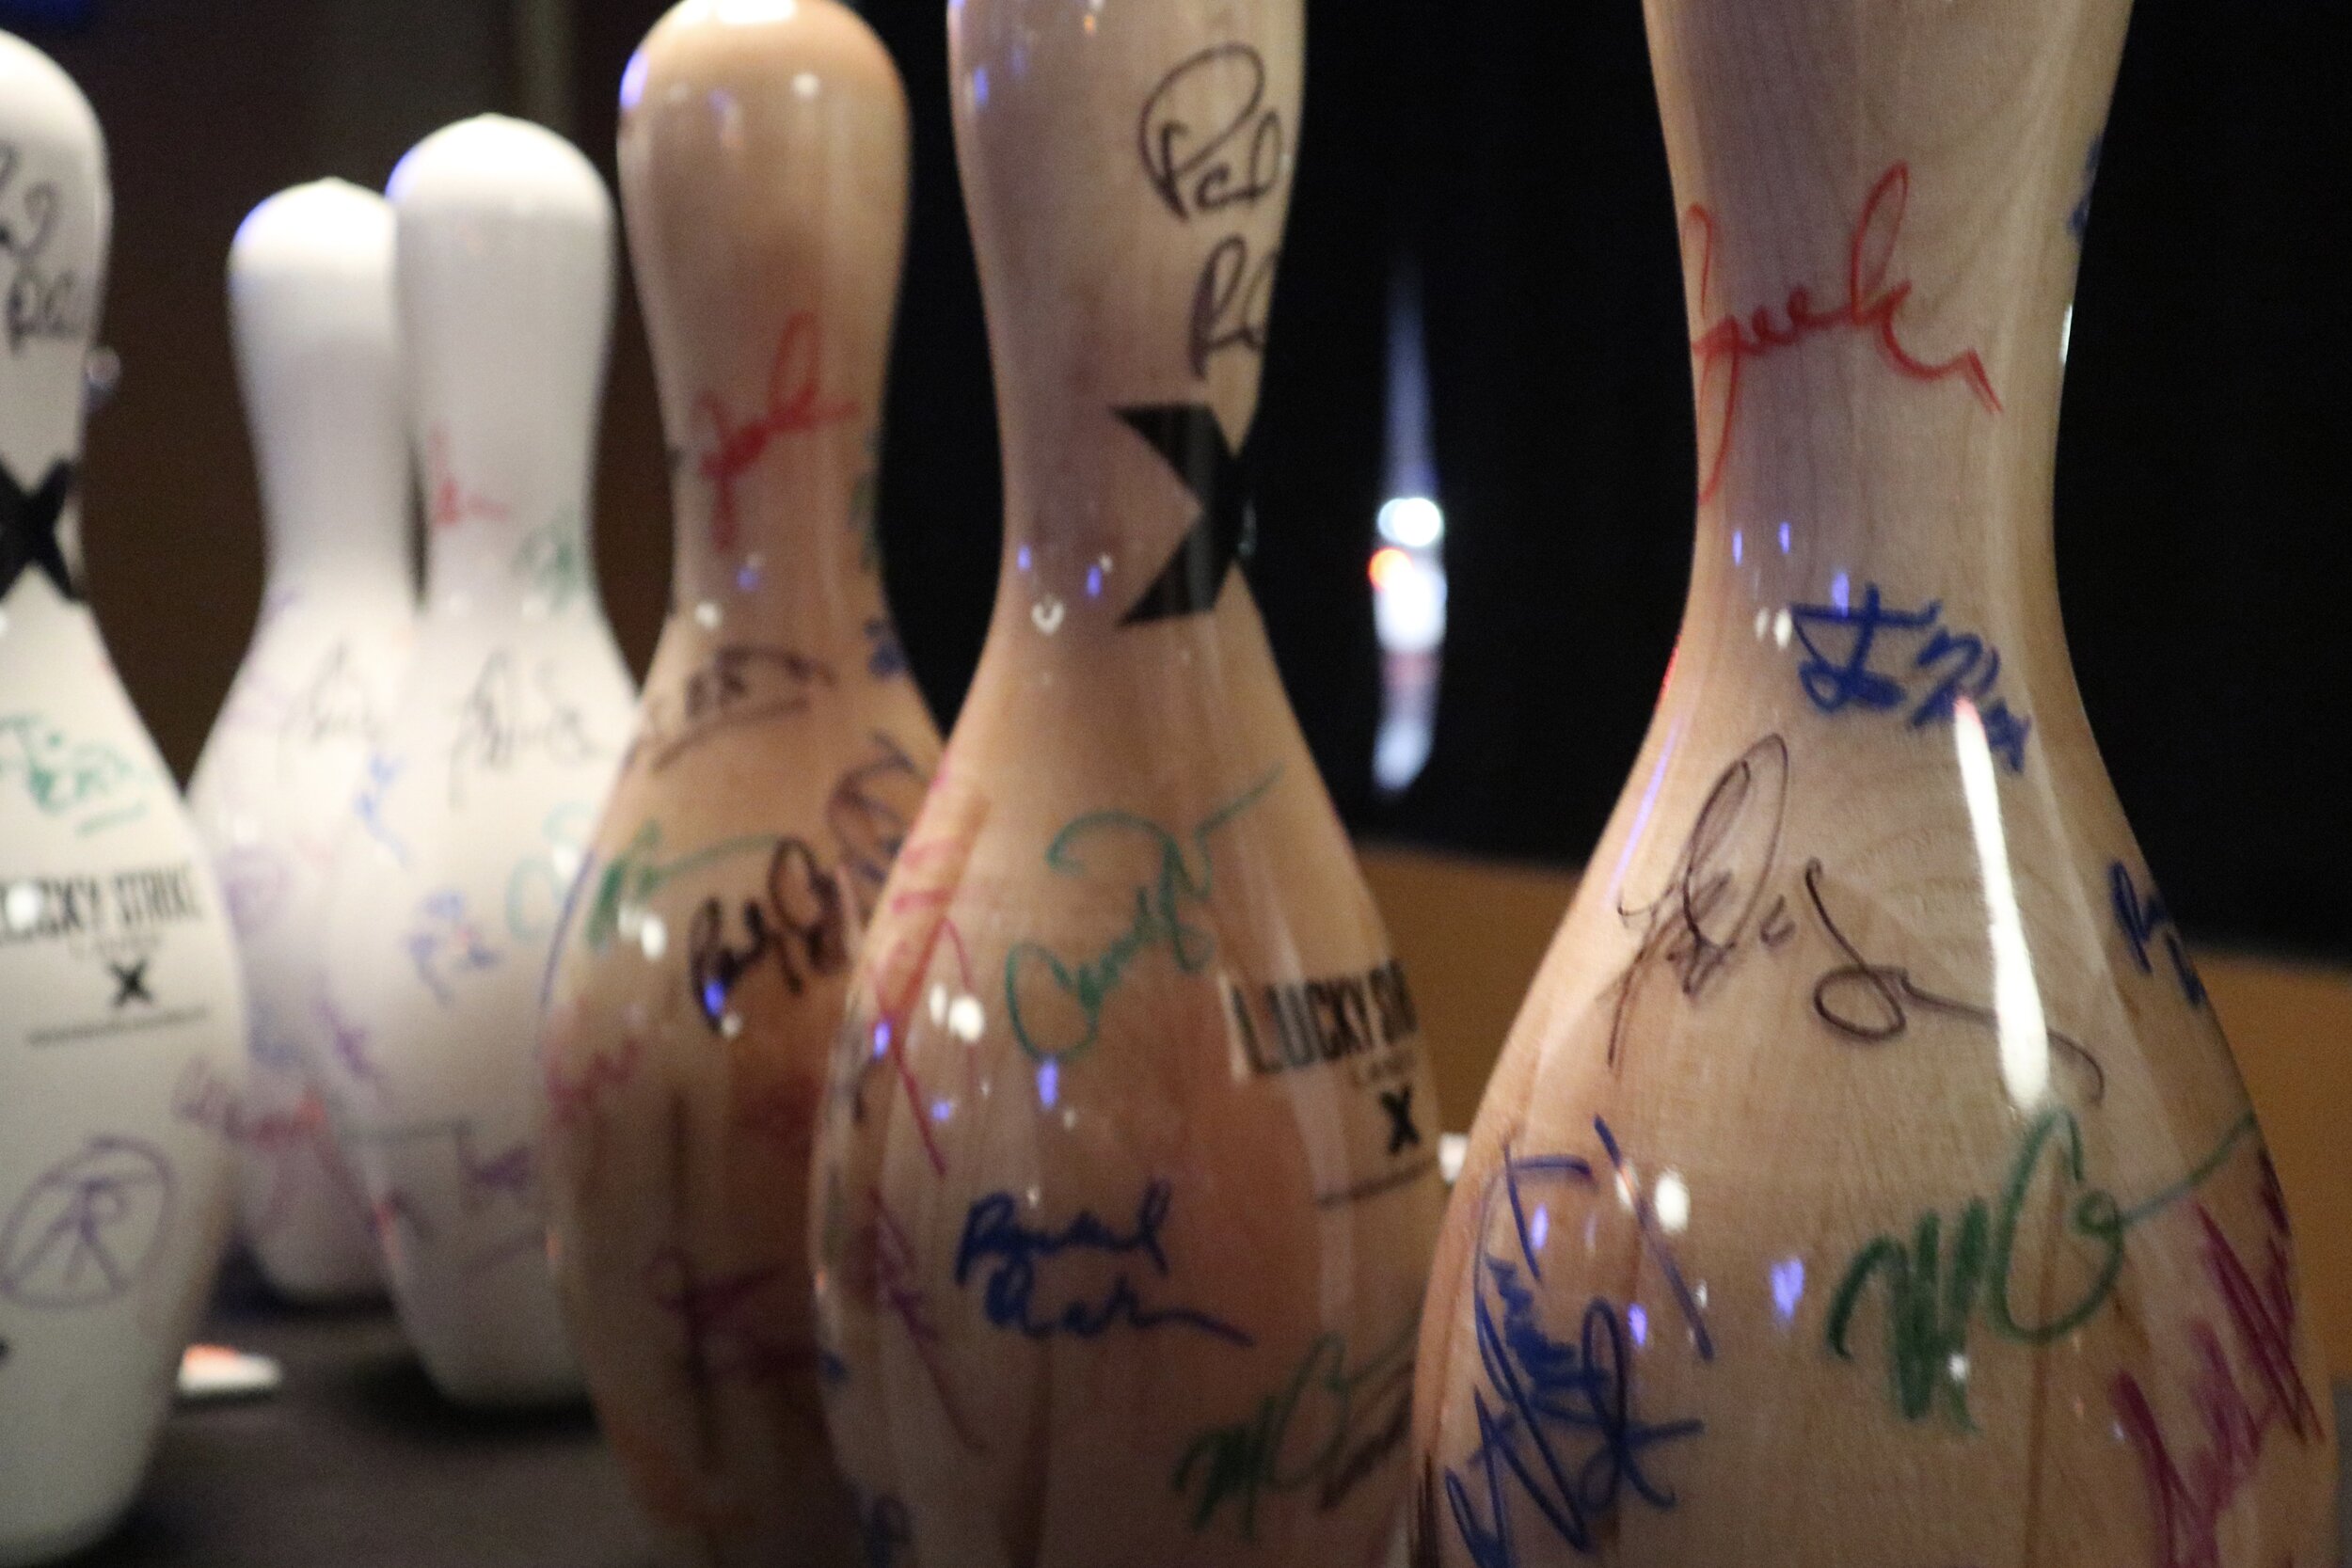 Autographed Bowling Pins at SAY's #RuddBowling Event